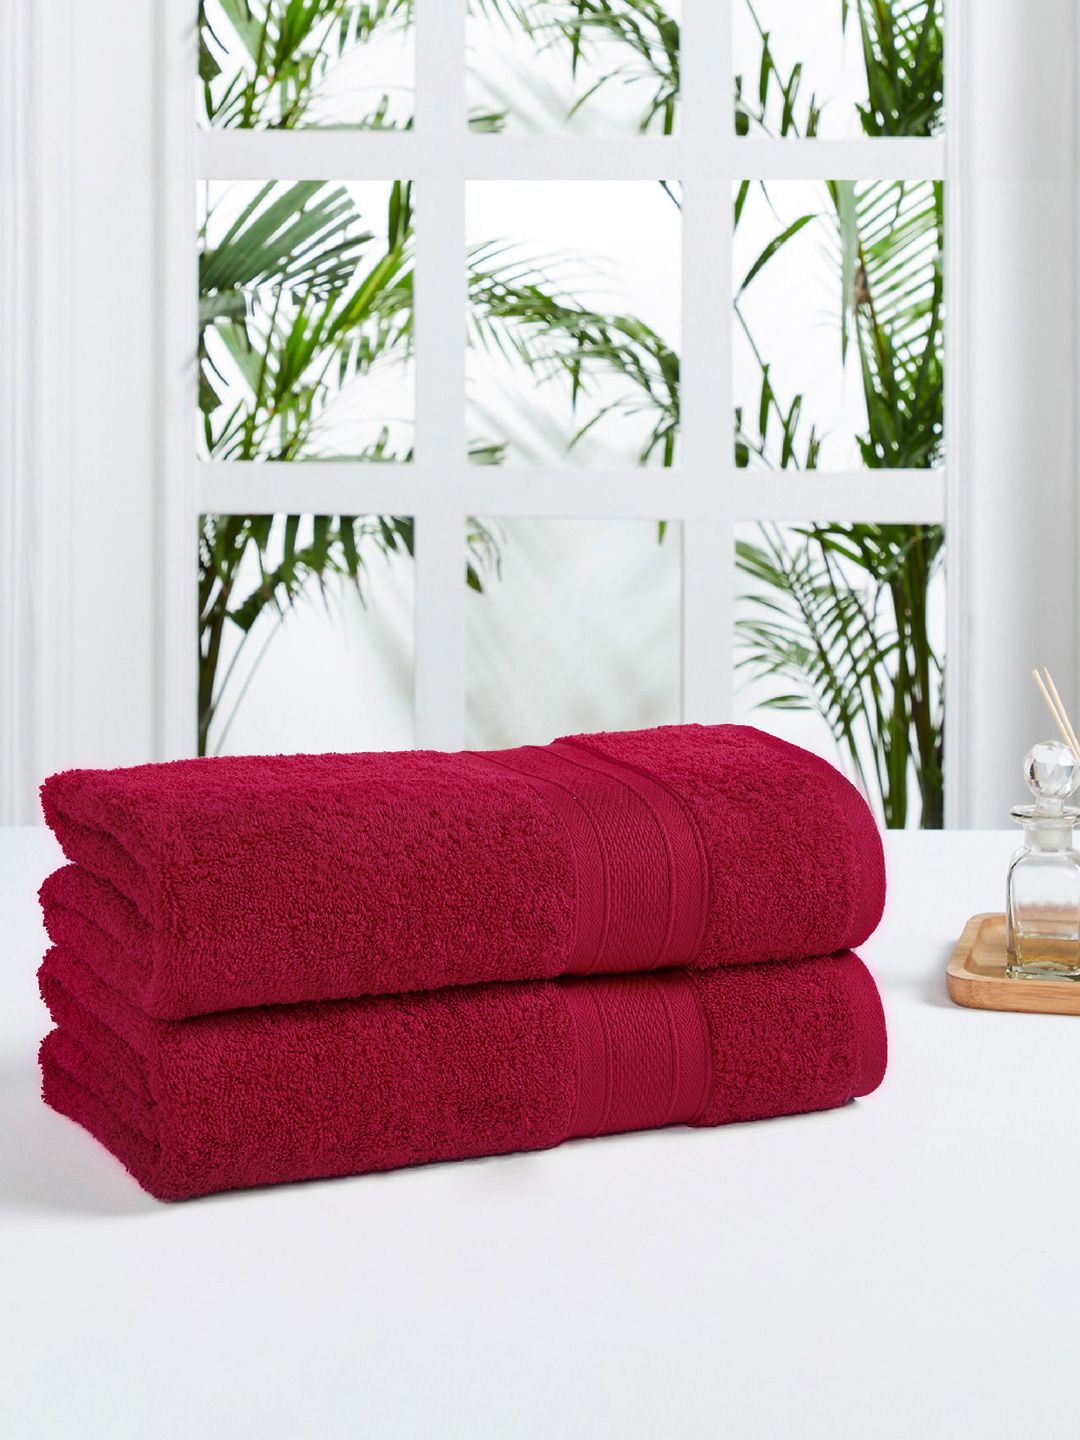 Trident 2 Piece Bath Towel Red Soft and Plush 100% Cotton 500 GSM Price in India